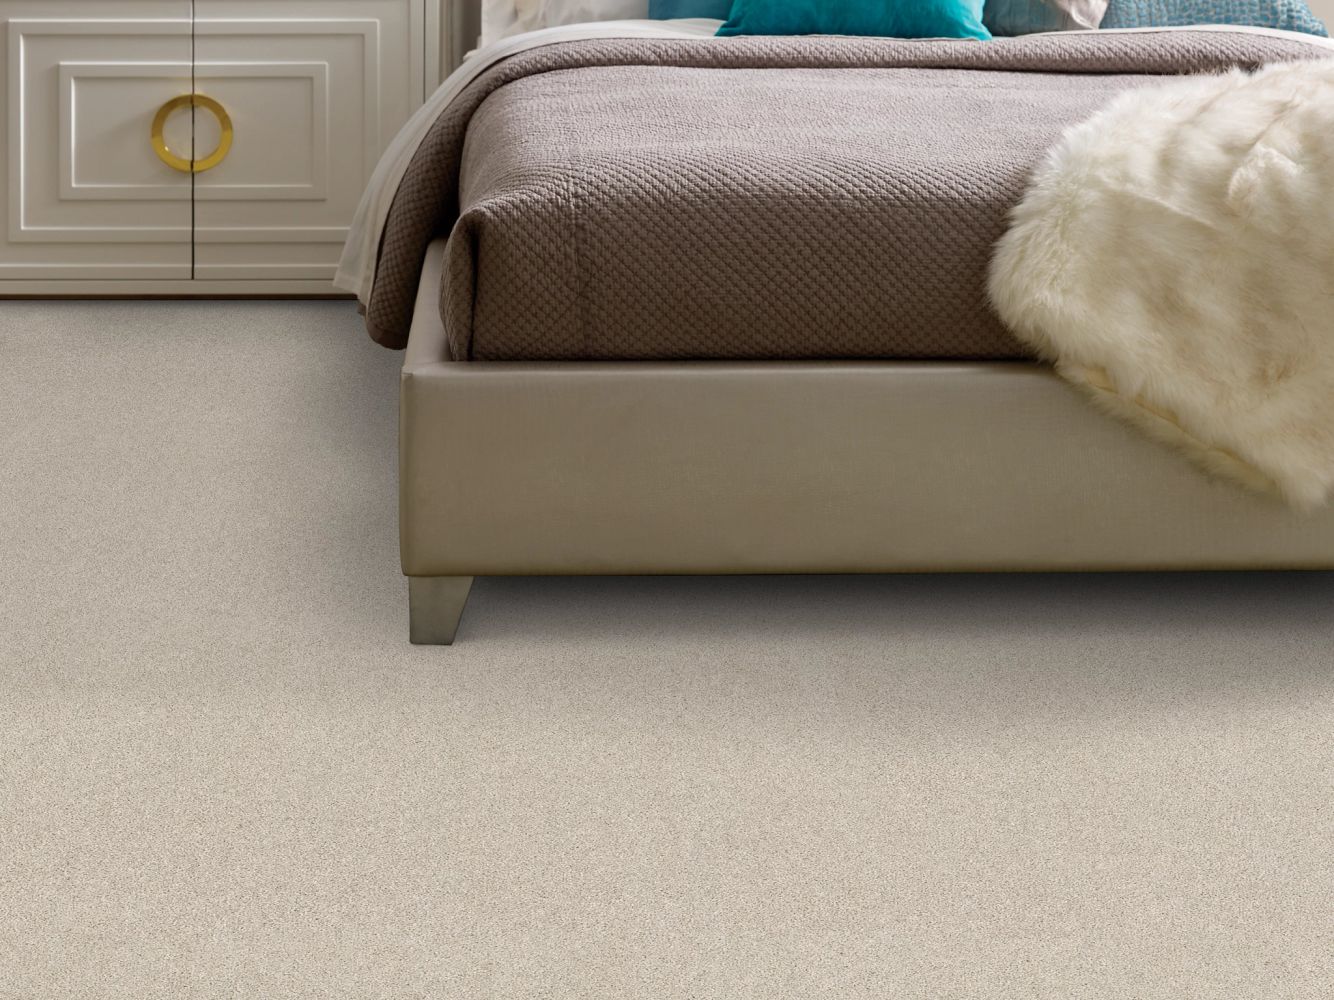 Shaw Floors Carpetland Value FROM NOW ON II Crushed Shell 00123_7B7Q7